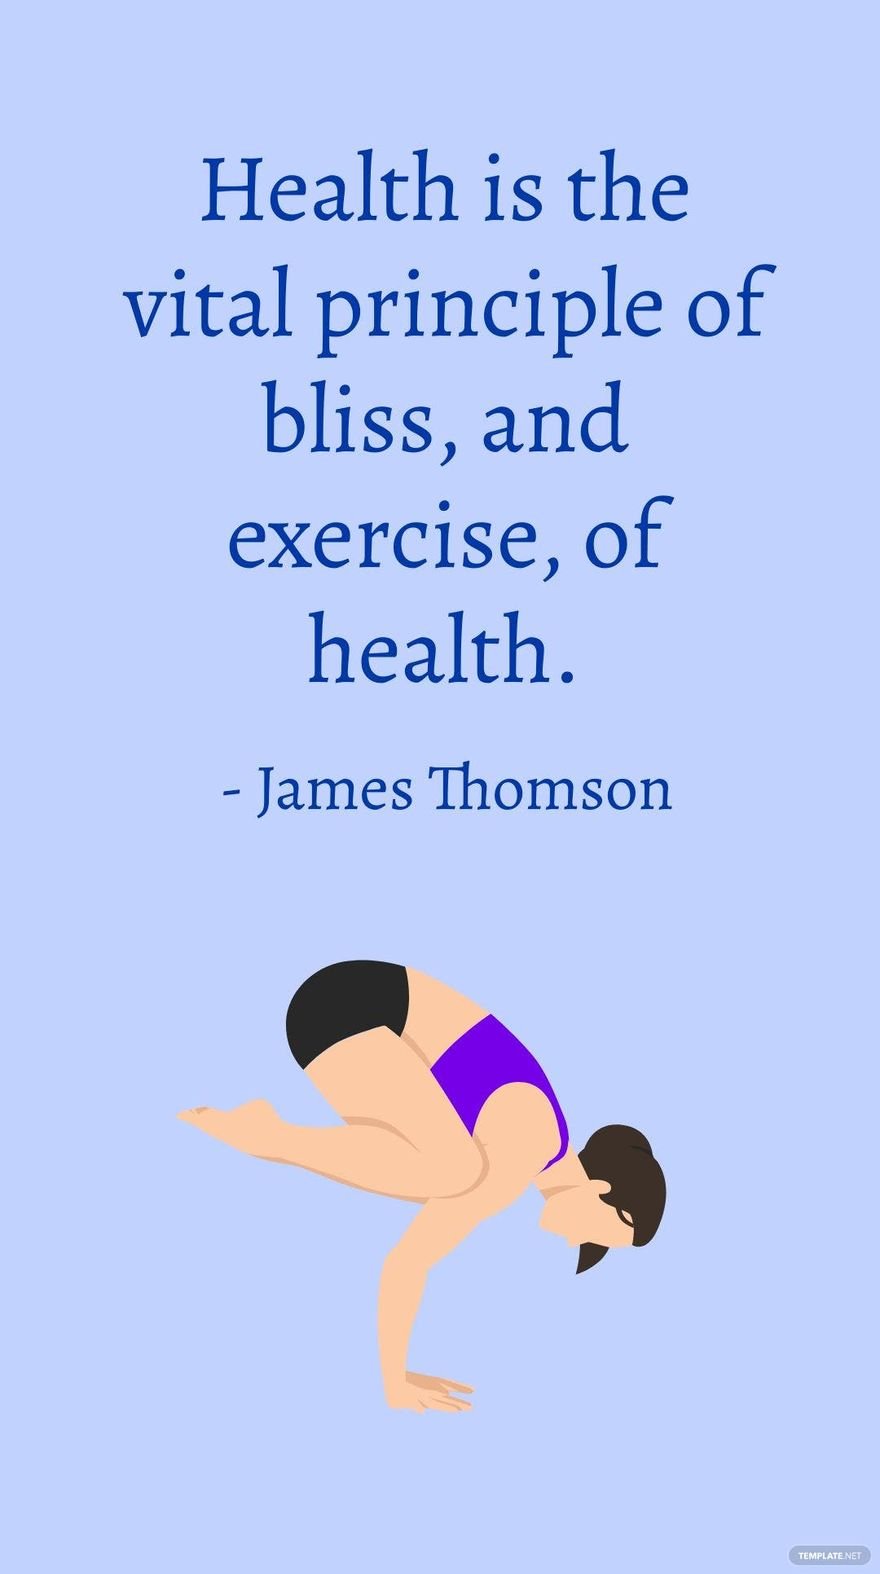 James Thomson - Health is the vital principle of bliss, and exercise, of health. - James Thomson in JPG